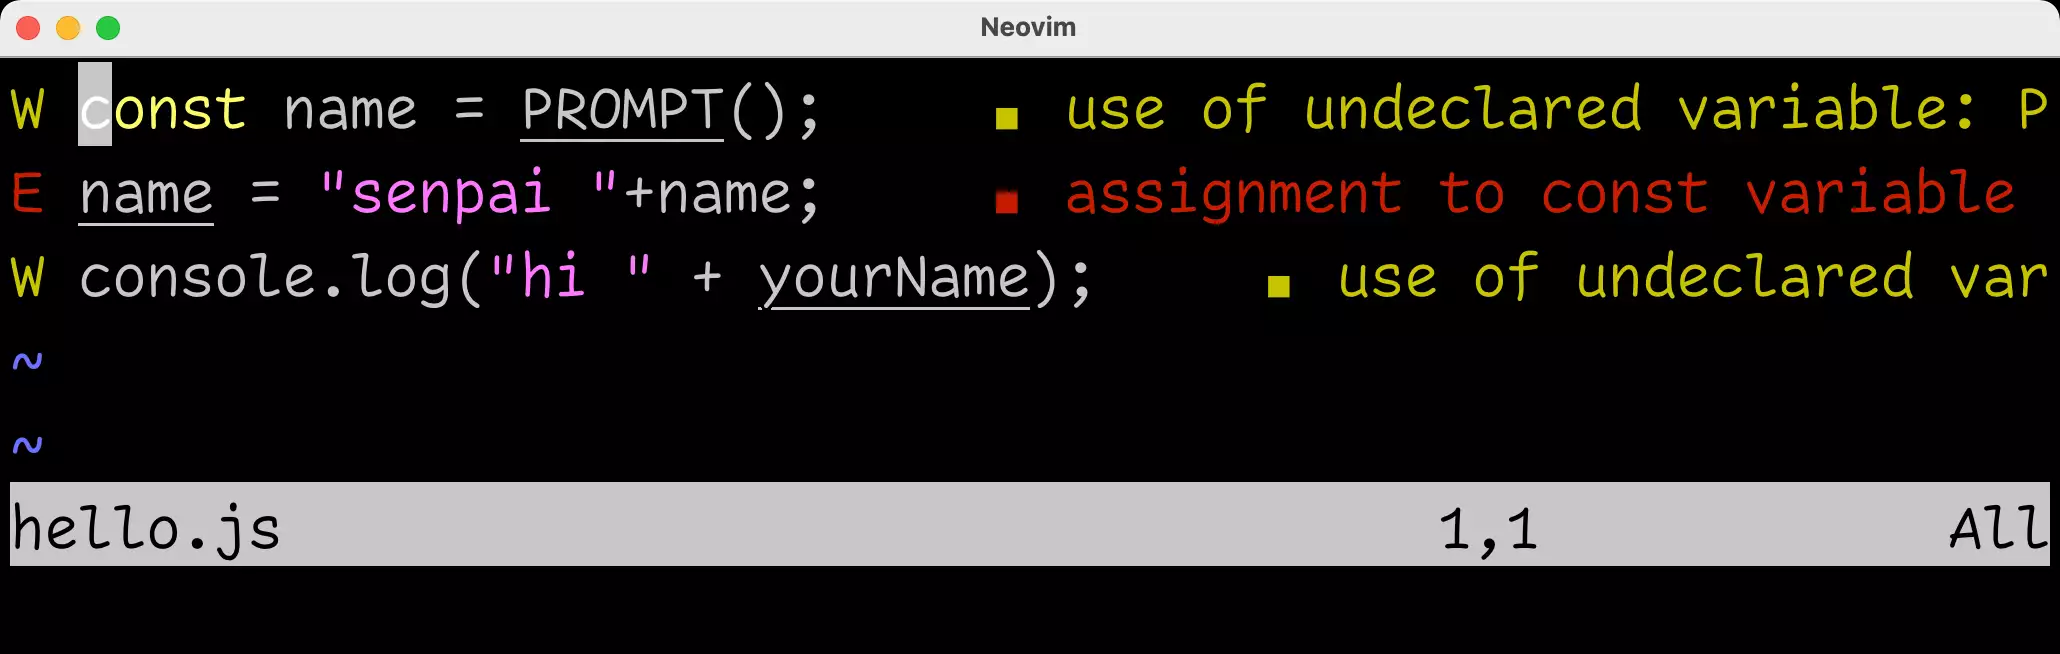 Fixing several mistakes in a JavaScript program in Neovim, demonstrating quick-lint-js